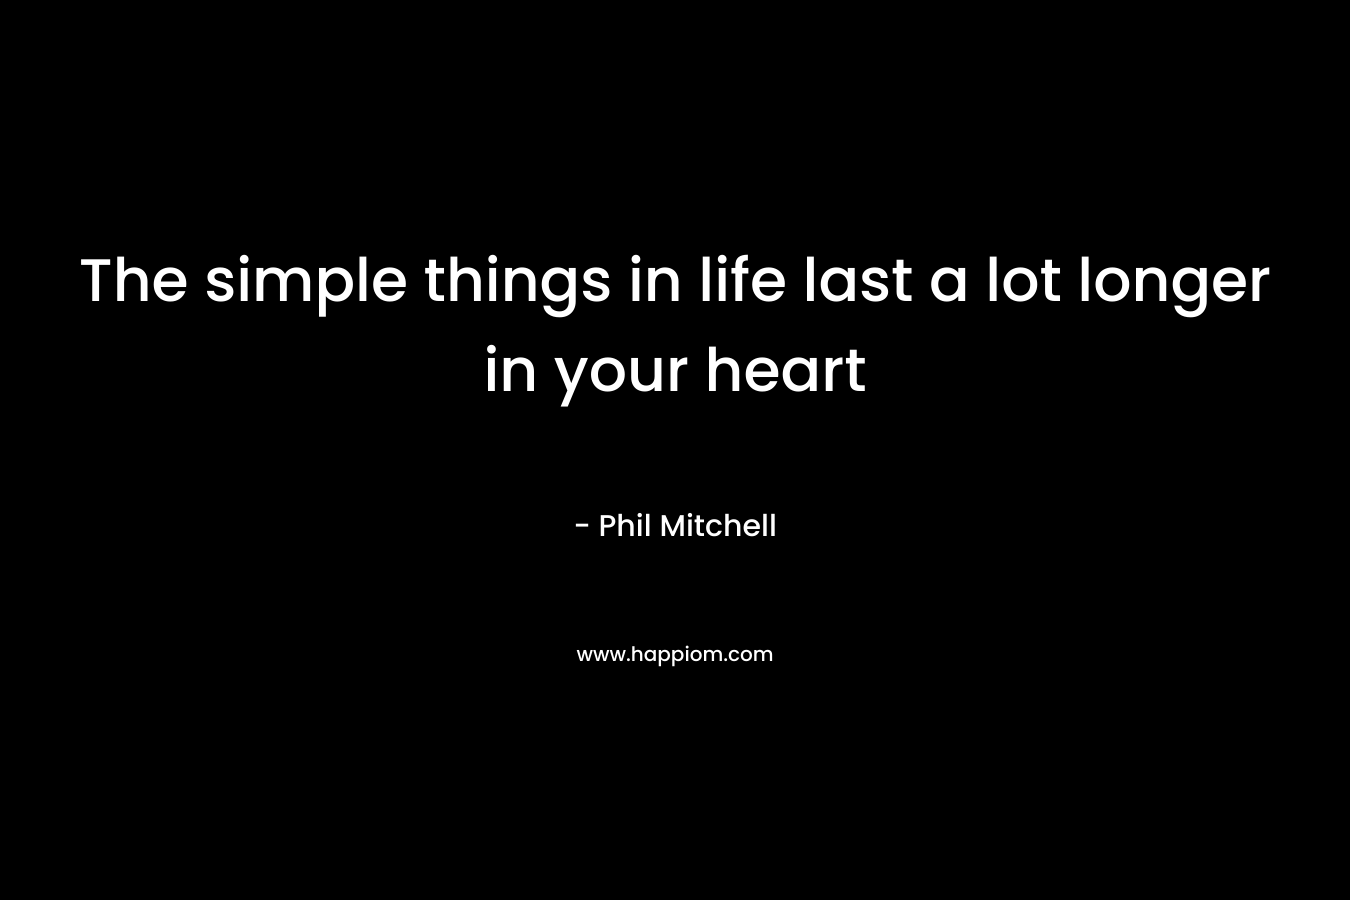 The simple things in life last a lot longer in your heart